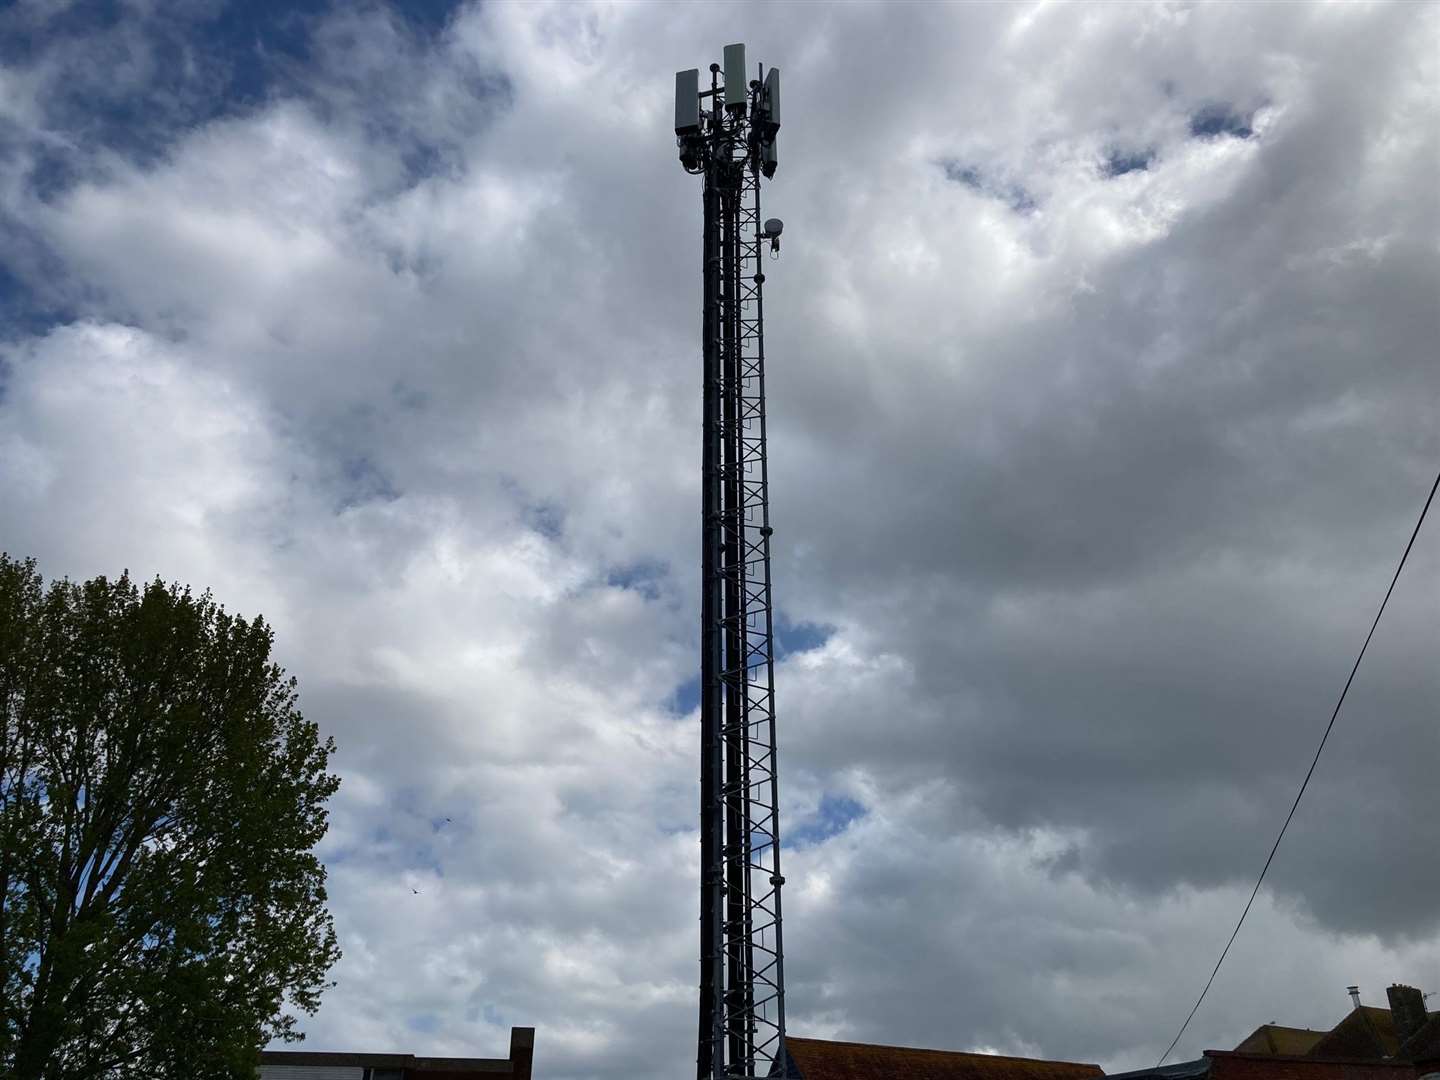 A more elaborate communications mast installed in Faversham